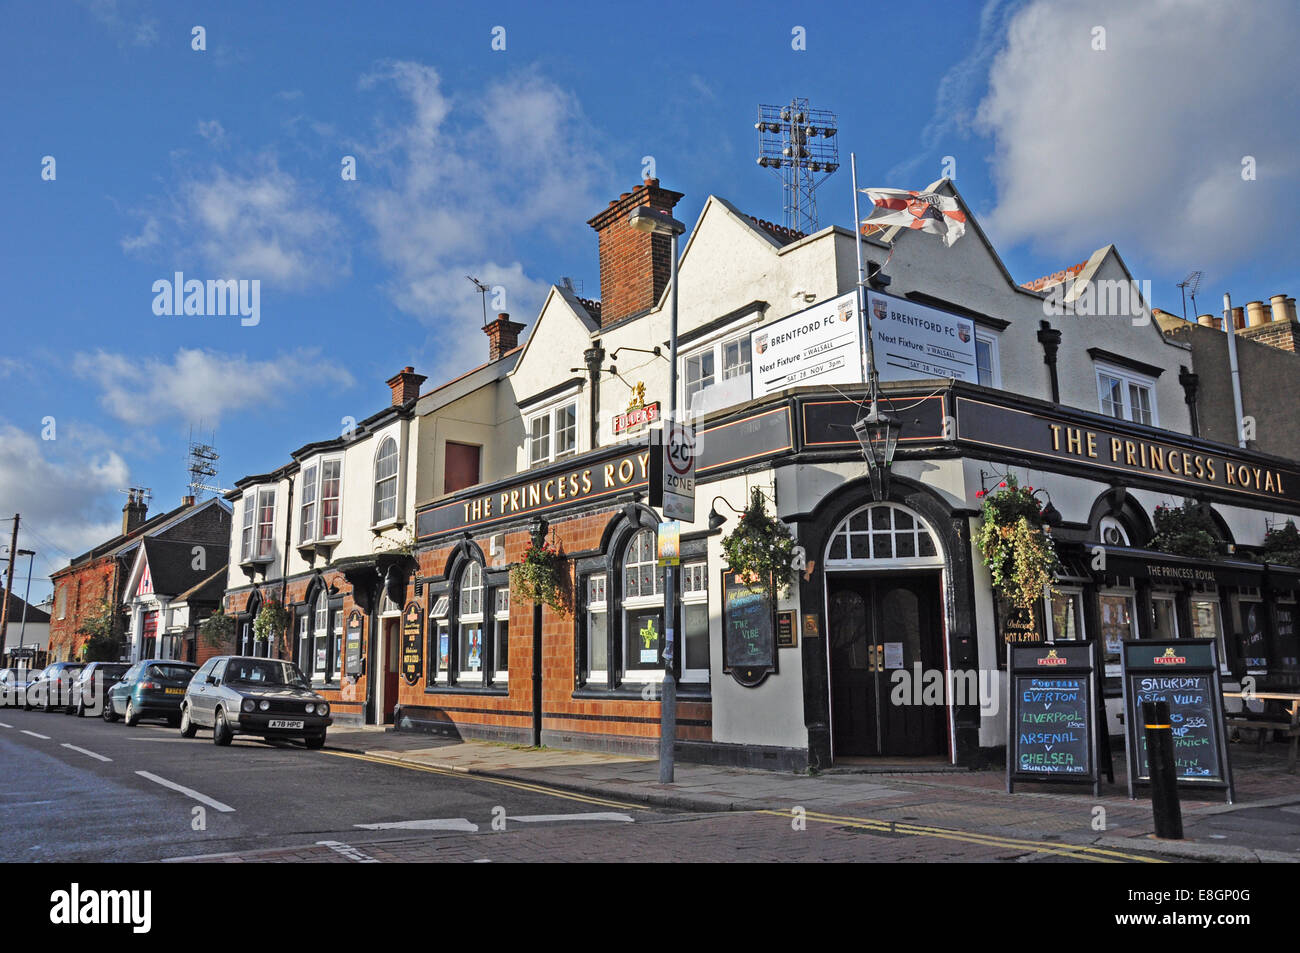 The Princess Royal public house (bar and restaurant) on Ealing Road, Brentford, Middlesex, near London, England, UK. Stock Photo